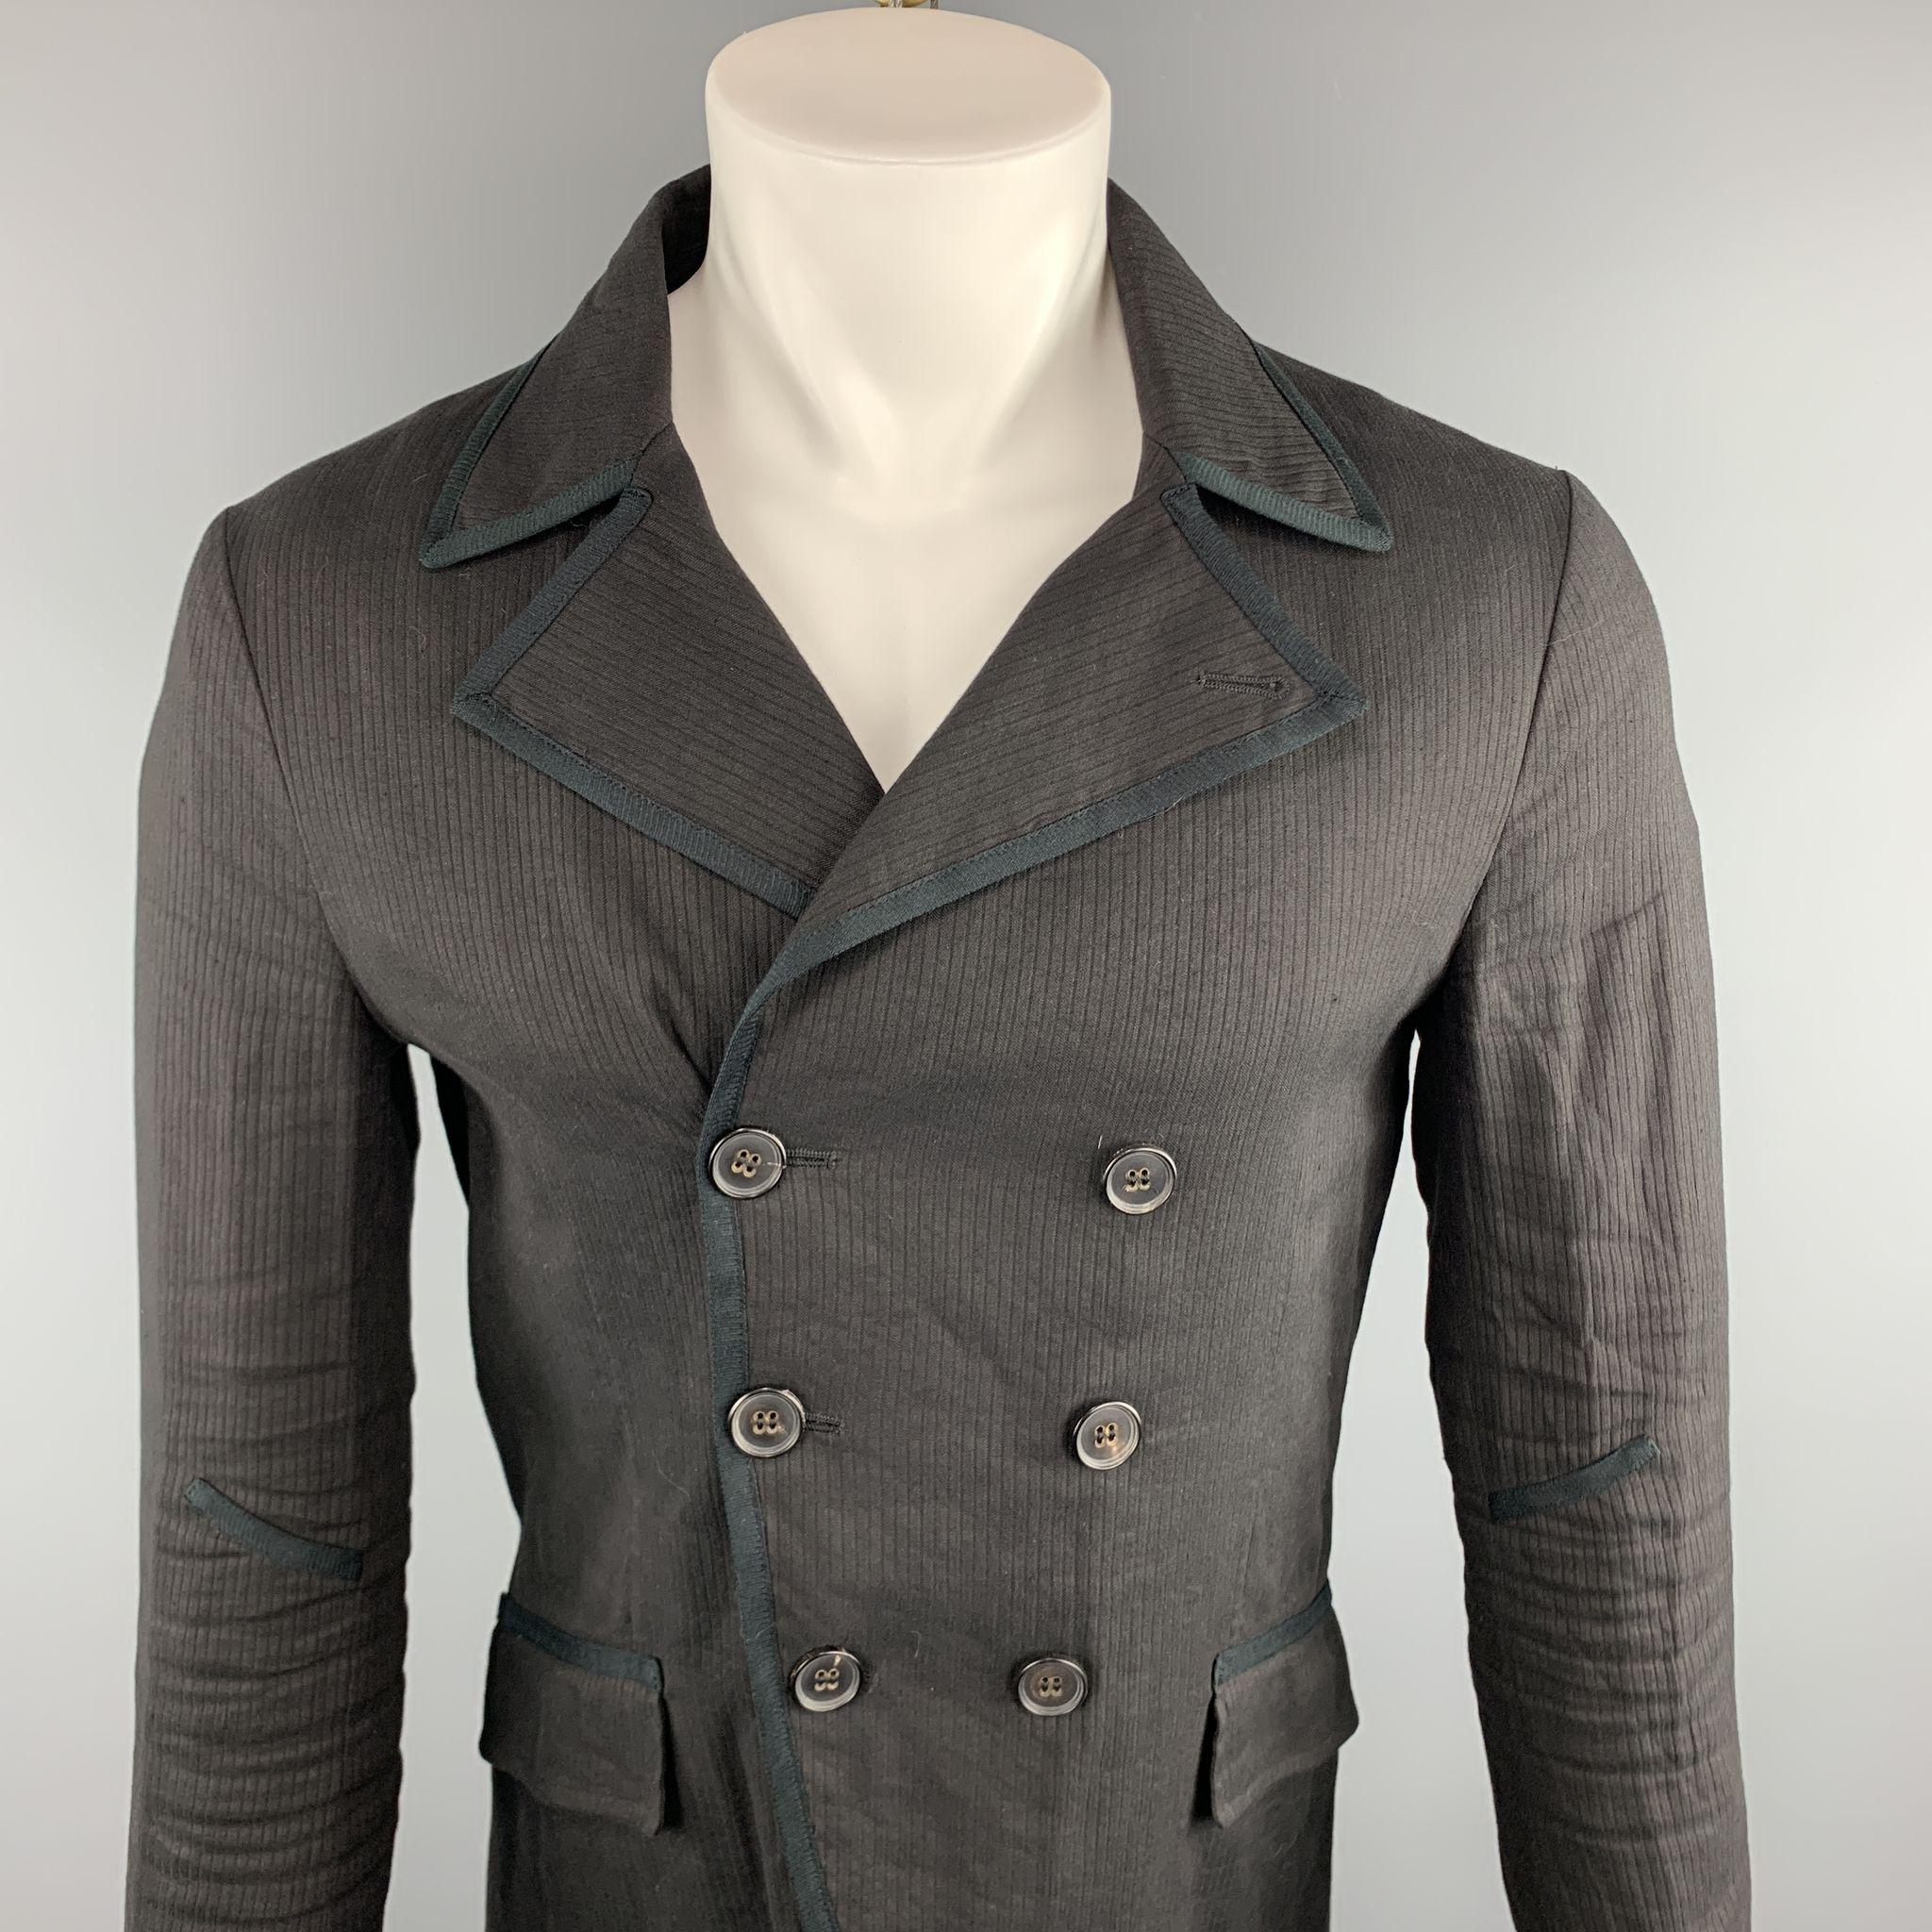 JOHN VARVATOS Jacket comes in a black viscose blend featuring a double breasted style and flap pockets. Made in Italy. 

Excellent Pre-Owned Condition.
Marked: 44

Measurements:

Shoulder: 17 in. 
Chest: 38 in. 
Sleeve: 24 in. 
Length: 28 in. 

SKU: